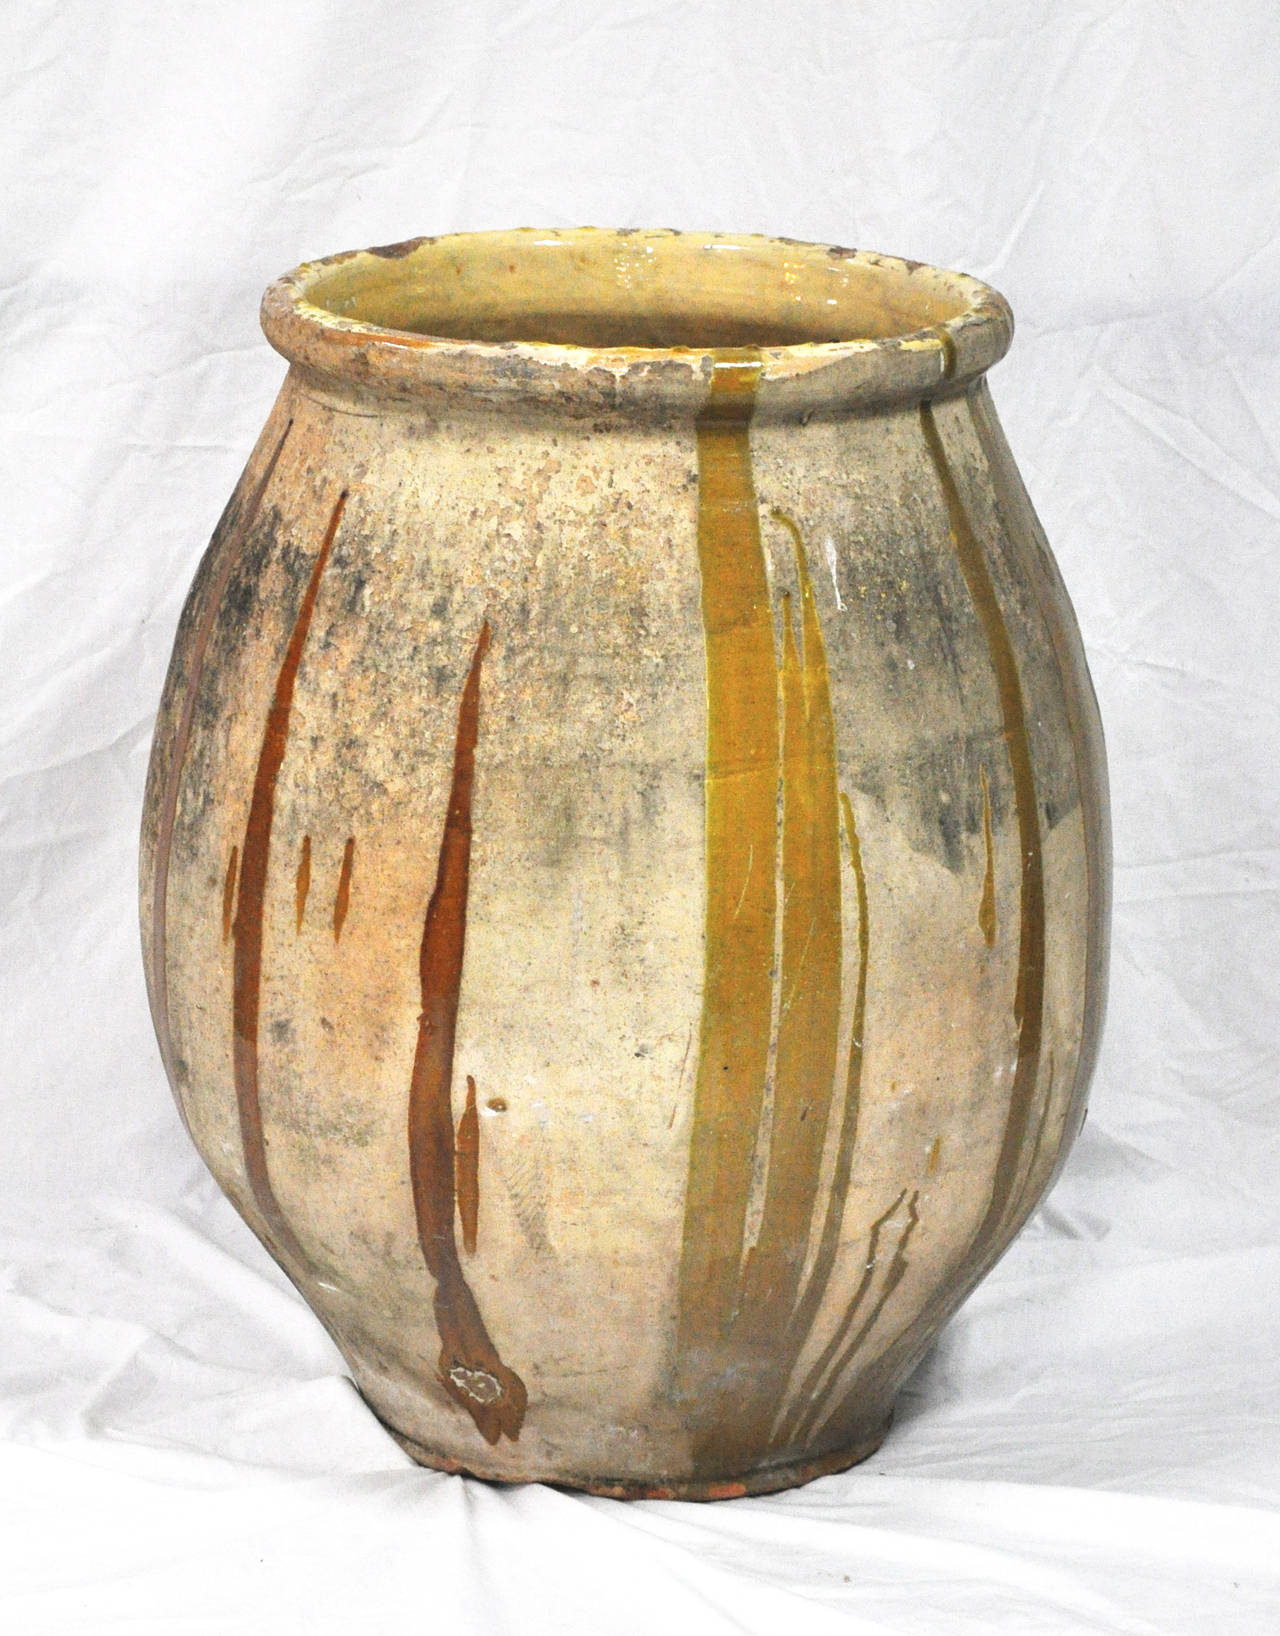 Handmade, much in demand antique French 'Biot' Olive Oil Pot; Biot, France. 19th century. Clay body particular to that region. 

Established in 1979, Joyce Horn Antiques, ltd. continues its 36 year tradition of being a family owned and operated